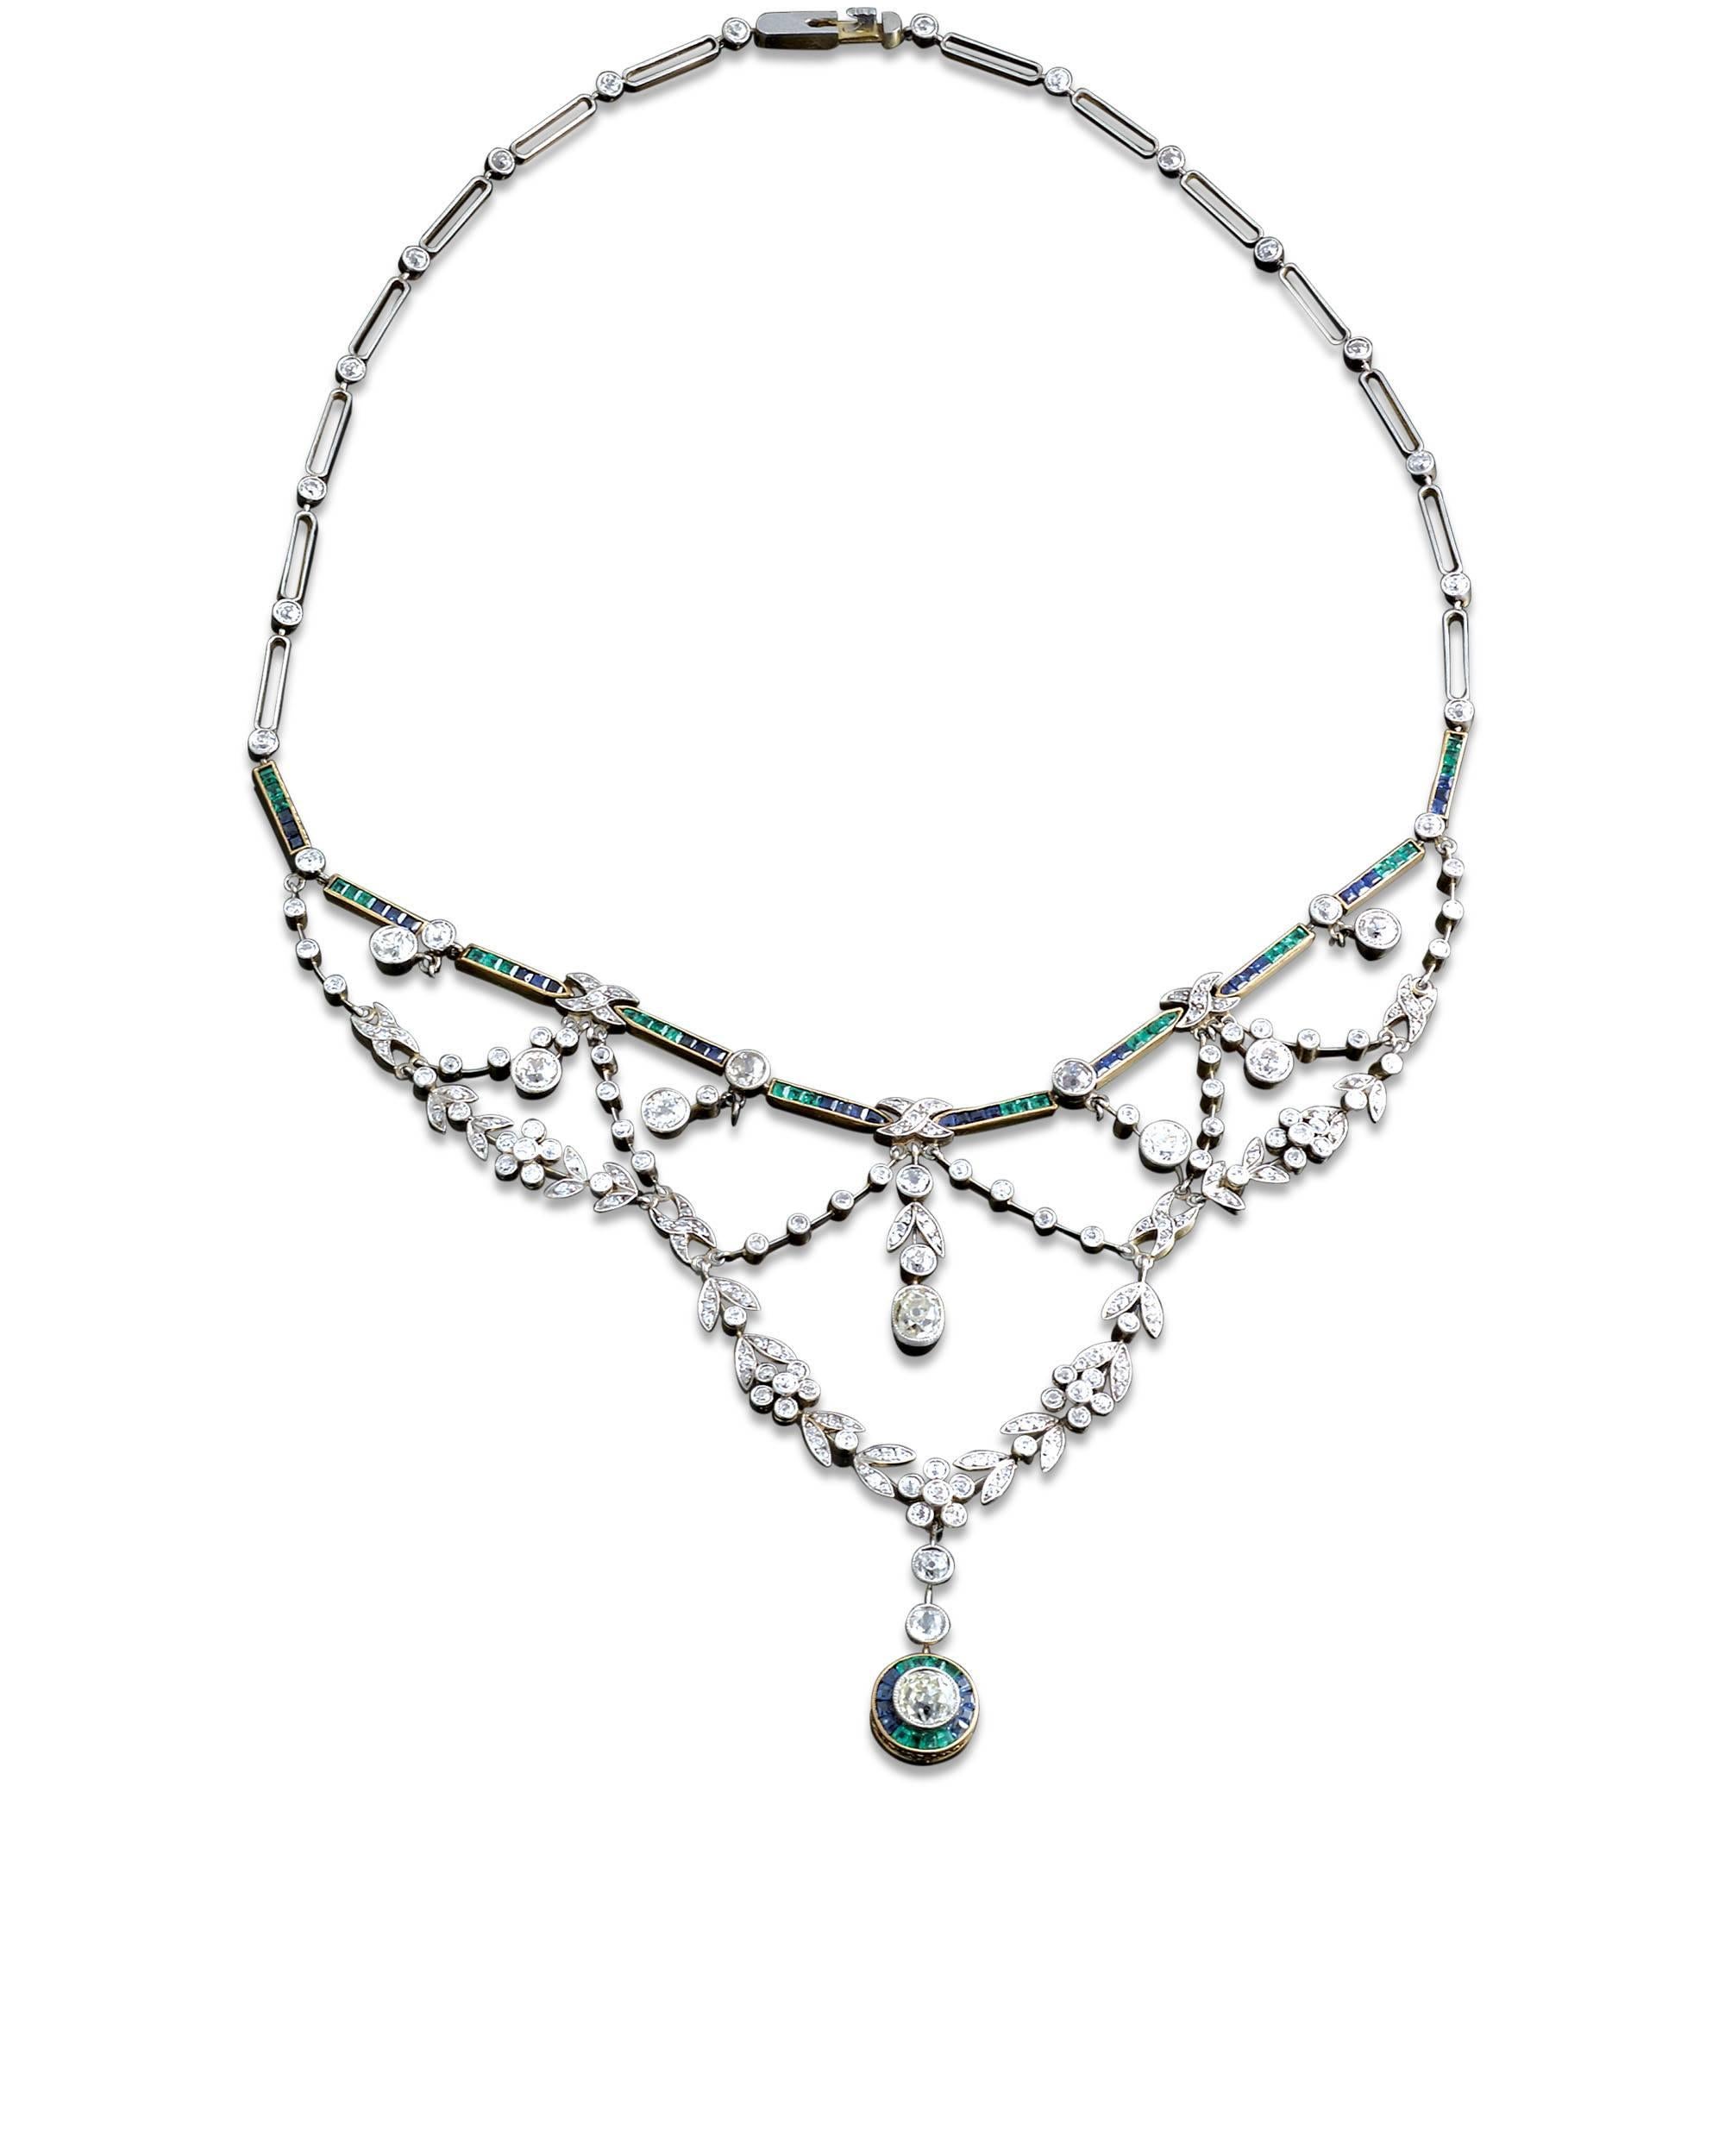 This stunning, classic Edwardian necklace is set with approximately 11.75 carats of shimmering white diamonds, while approximately 2.75 carats of vivid green emeralds and deep blue sapphires provide contrast and color. All gems are set in platinum